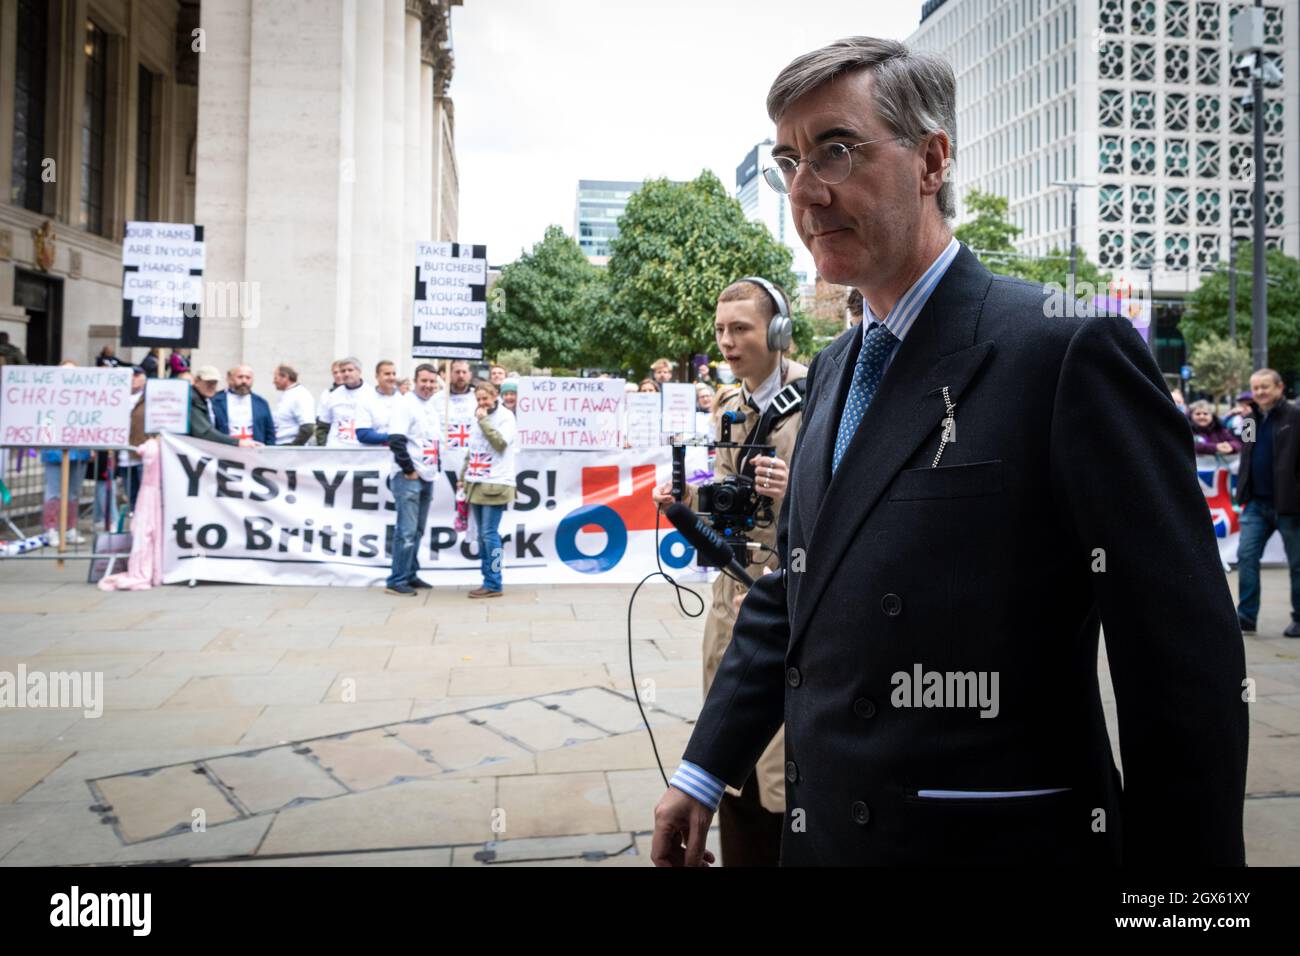 Manchester, UK. 04th Oct, 2021. Jacob Rees-Mogg walks towards the Conservative Party Conference past pig farmers who are protesting outside the event. British farmers protest against the Tory Party due to implications caused by Brexit, which has resulted in skills shortages and restrictions.ÊAndy Barton/Alamy Live News Credit: Andy Barton/Alamy Live News Stock Photo